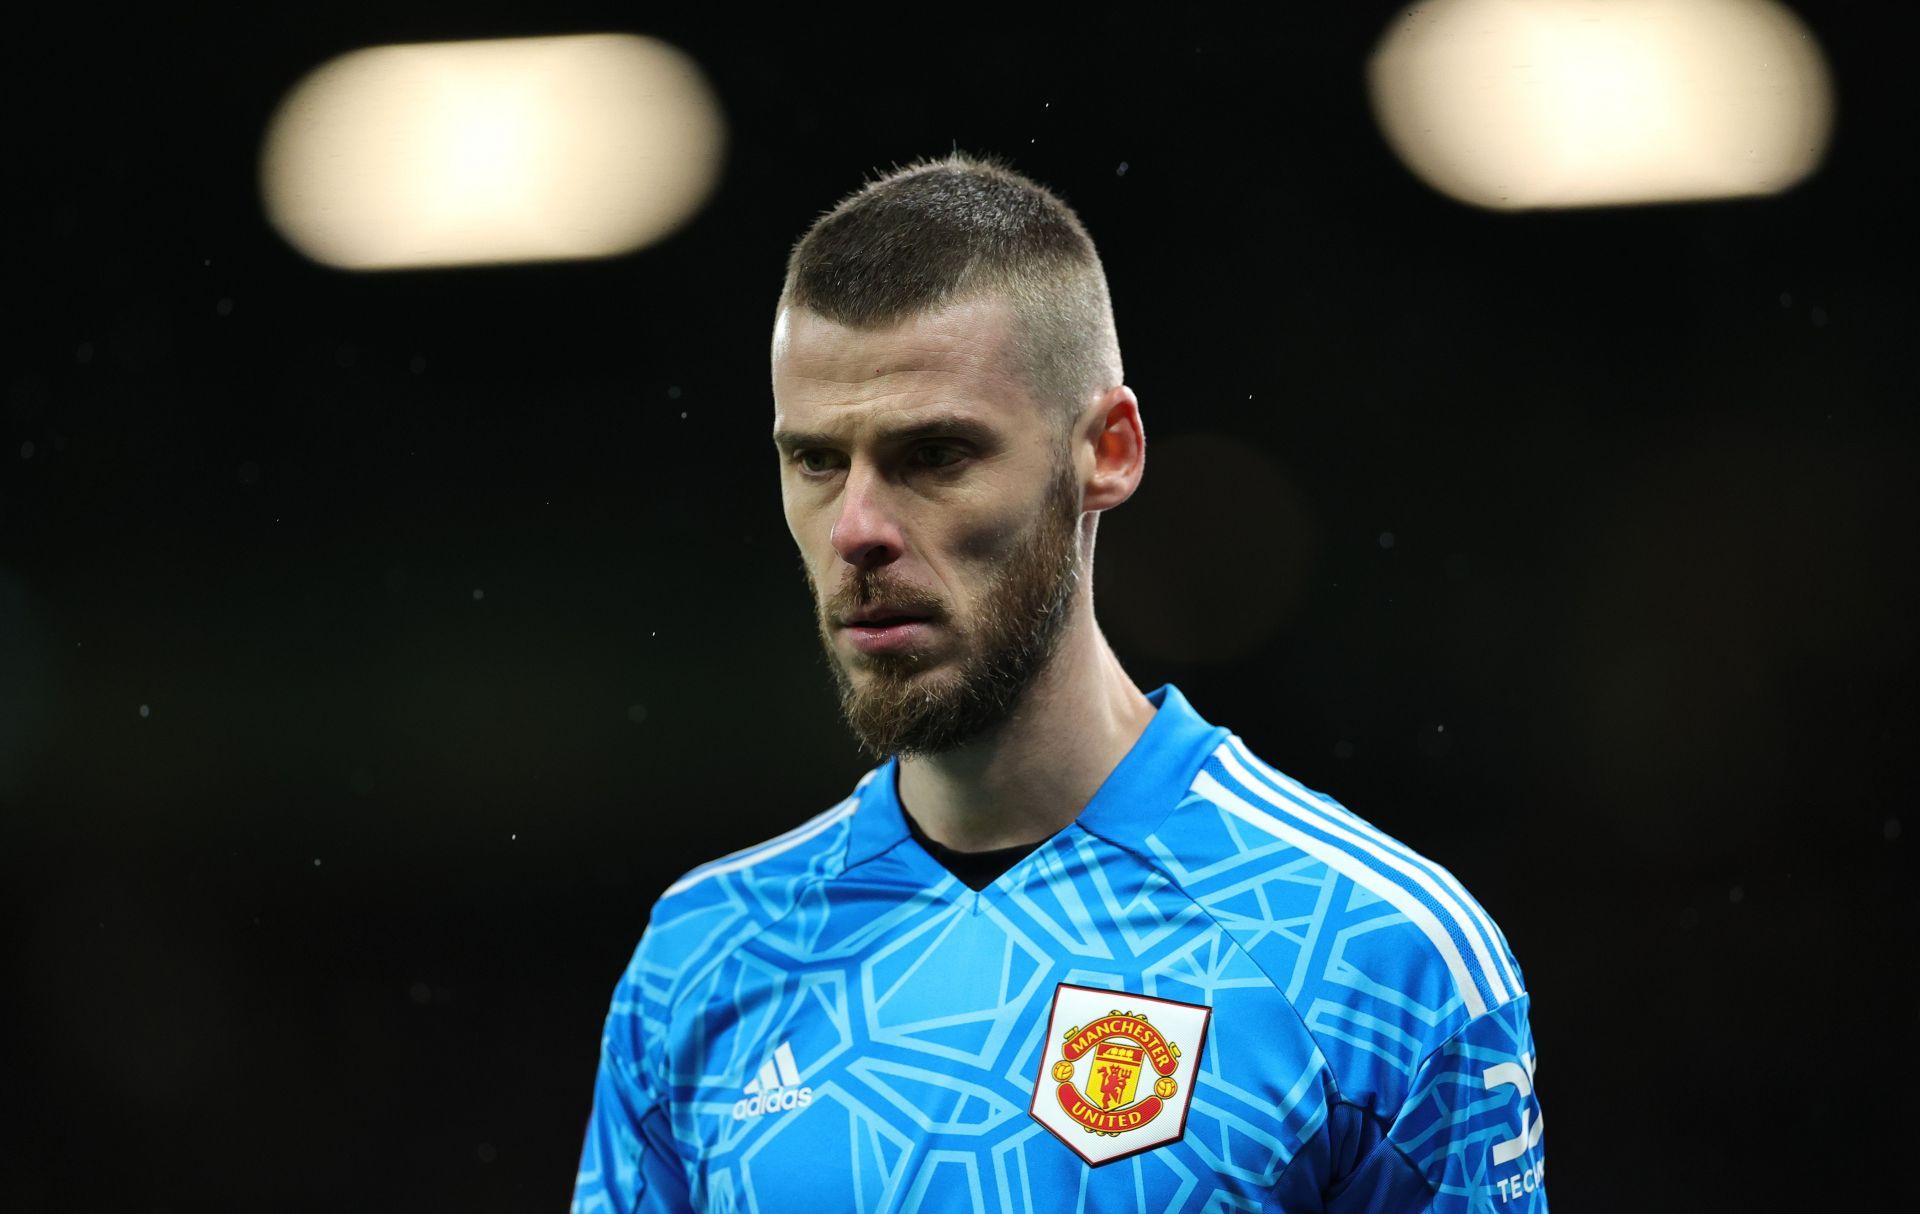 De Gea had a game to forget against West Ham.